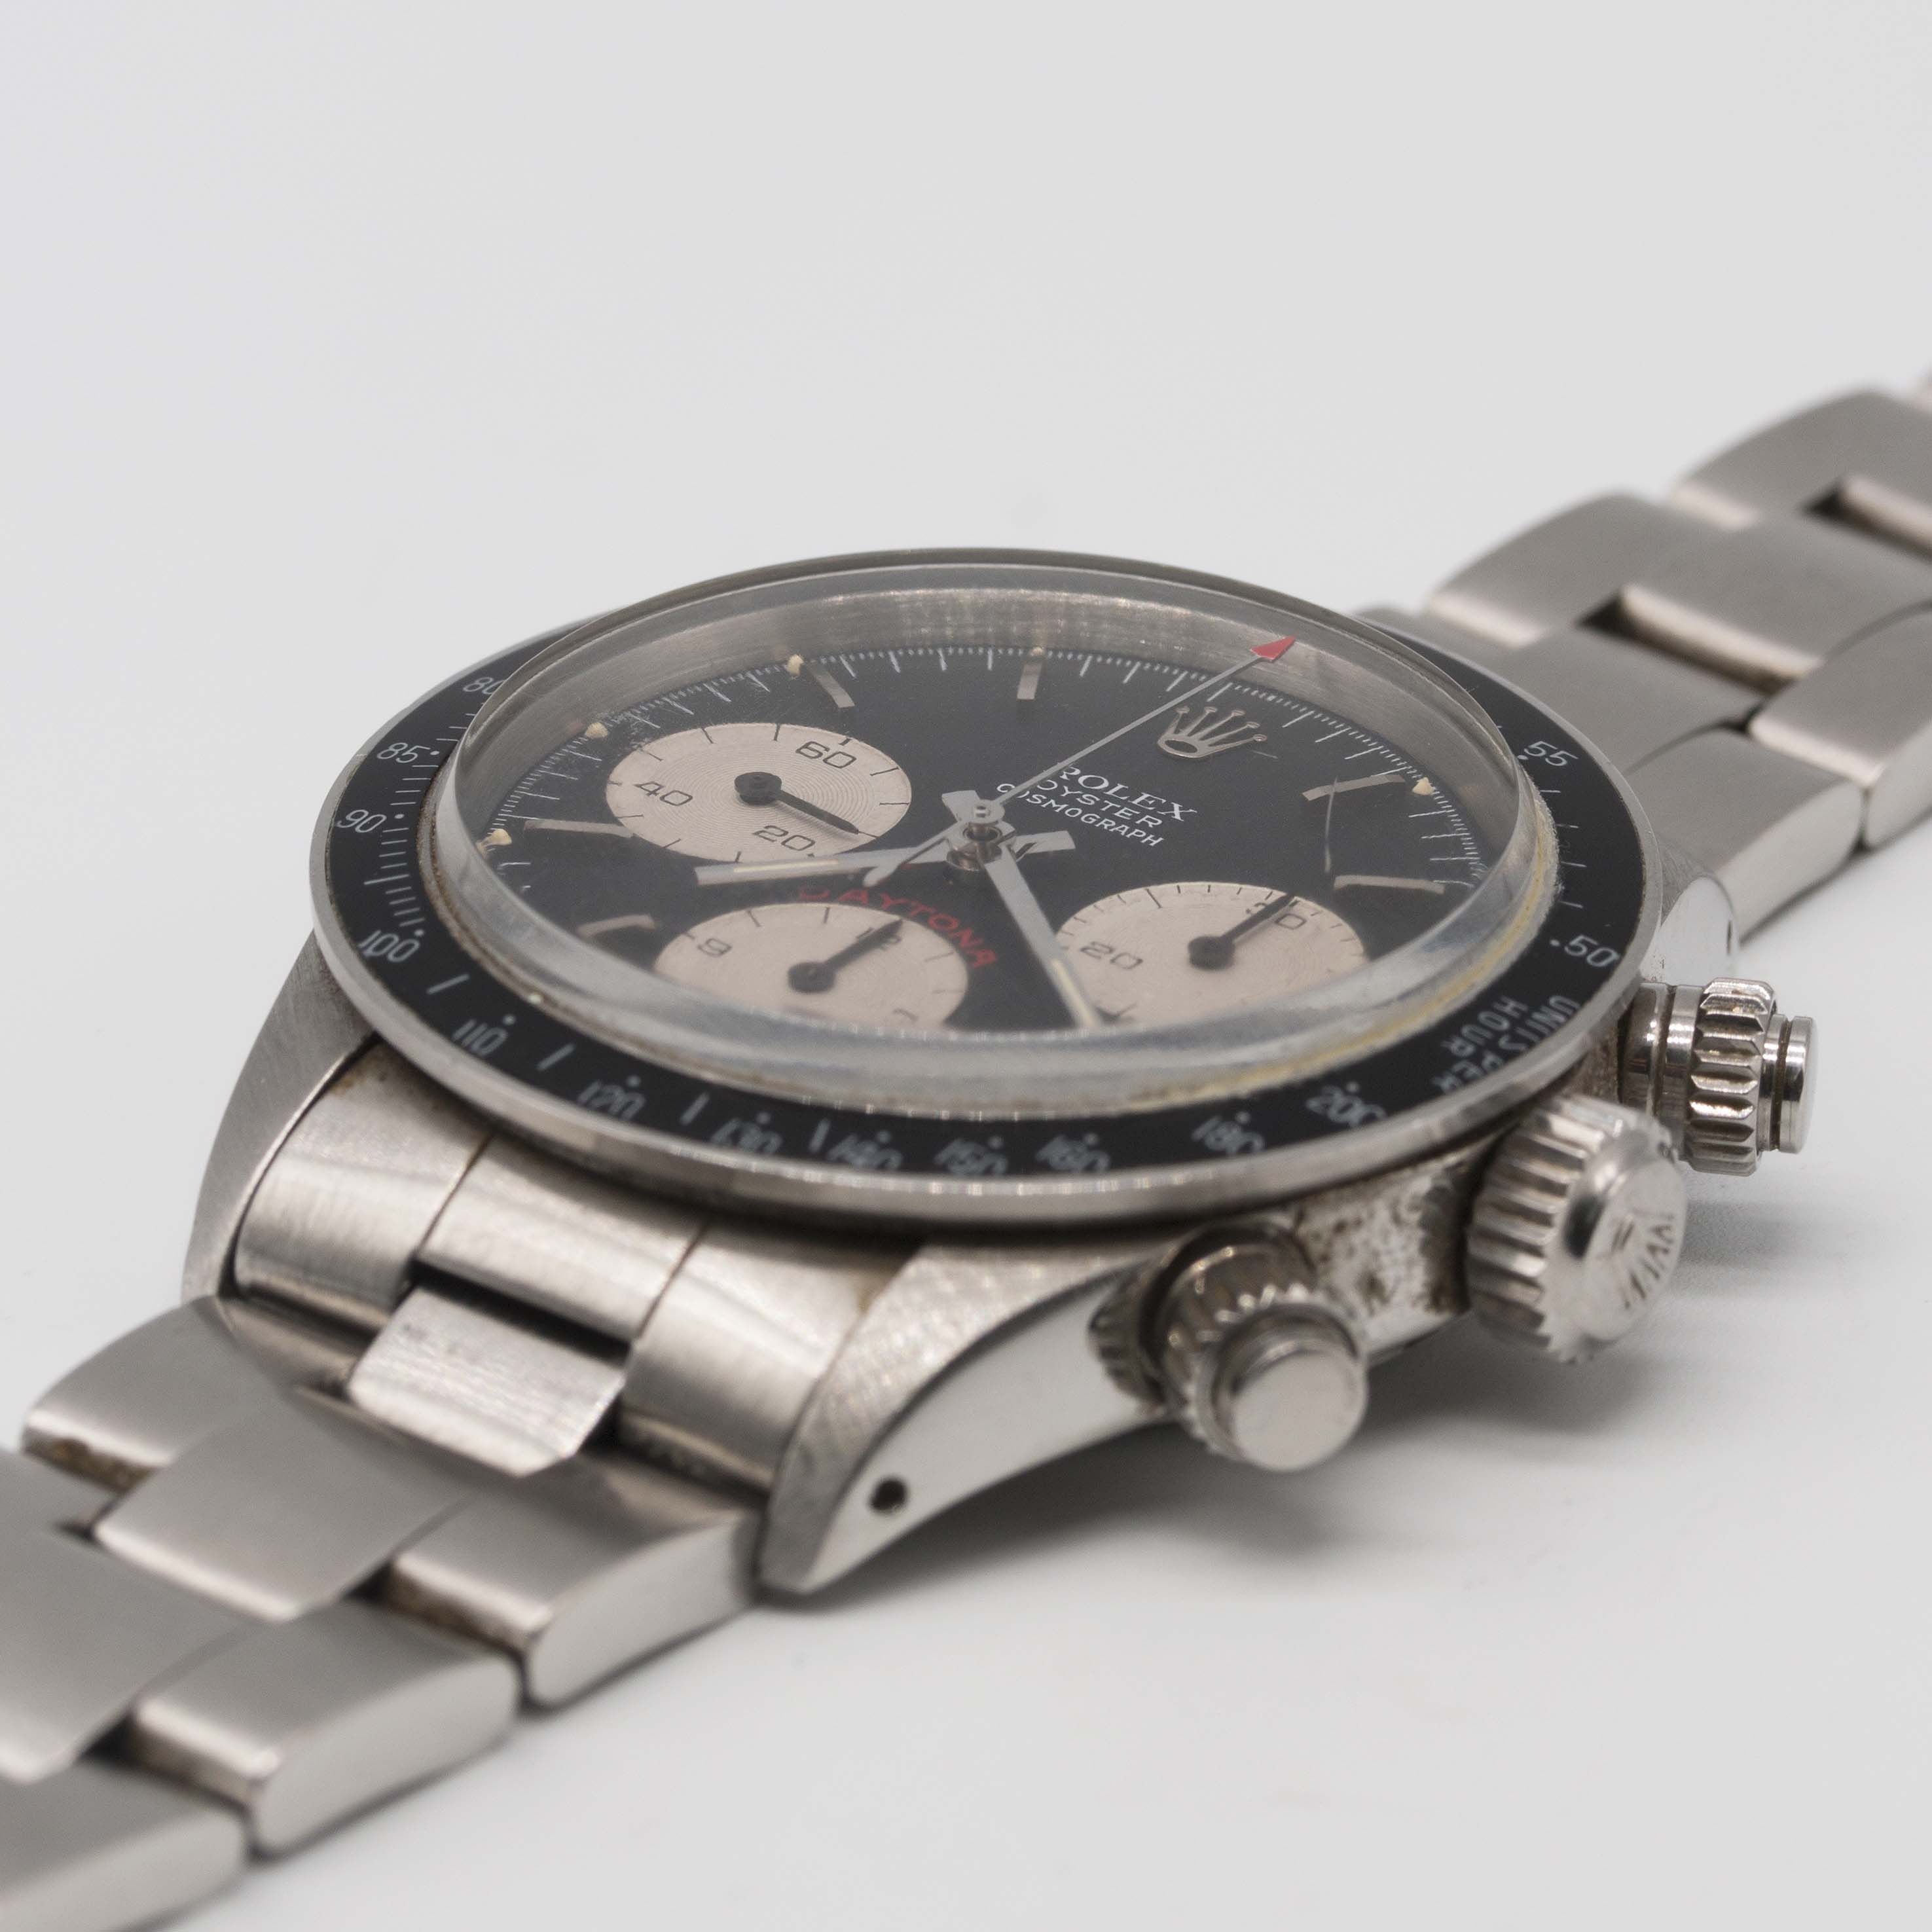 A VERY RARE GENTLEMAN'S STAINLESS STEEL ROLEX OYSTER COSMOGRAPH DAYTONA BRACELET WATCH CIRCA 1979, - Image 4 of 12